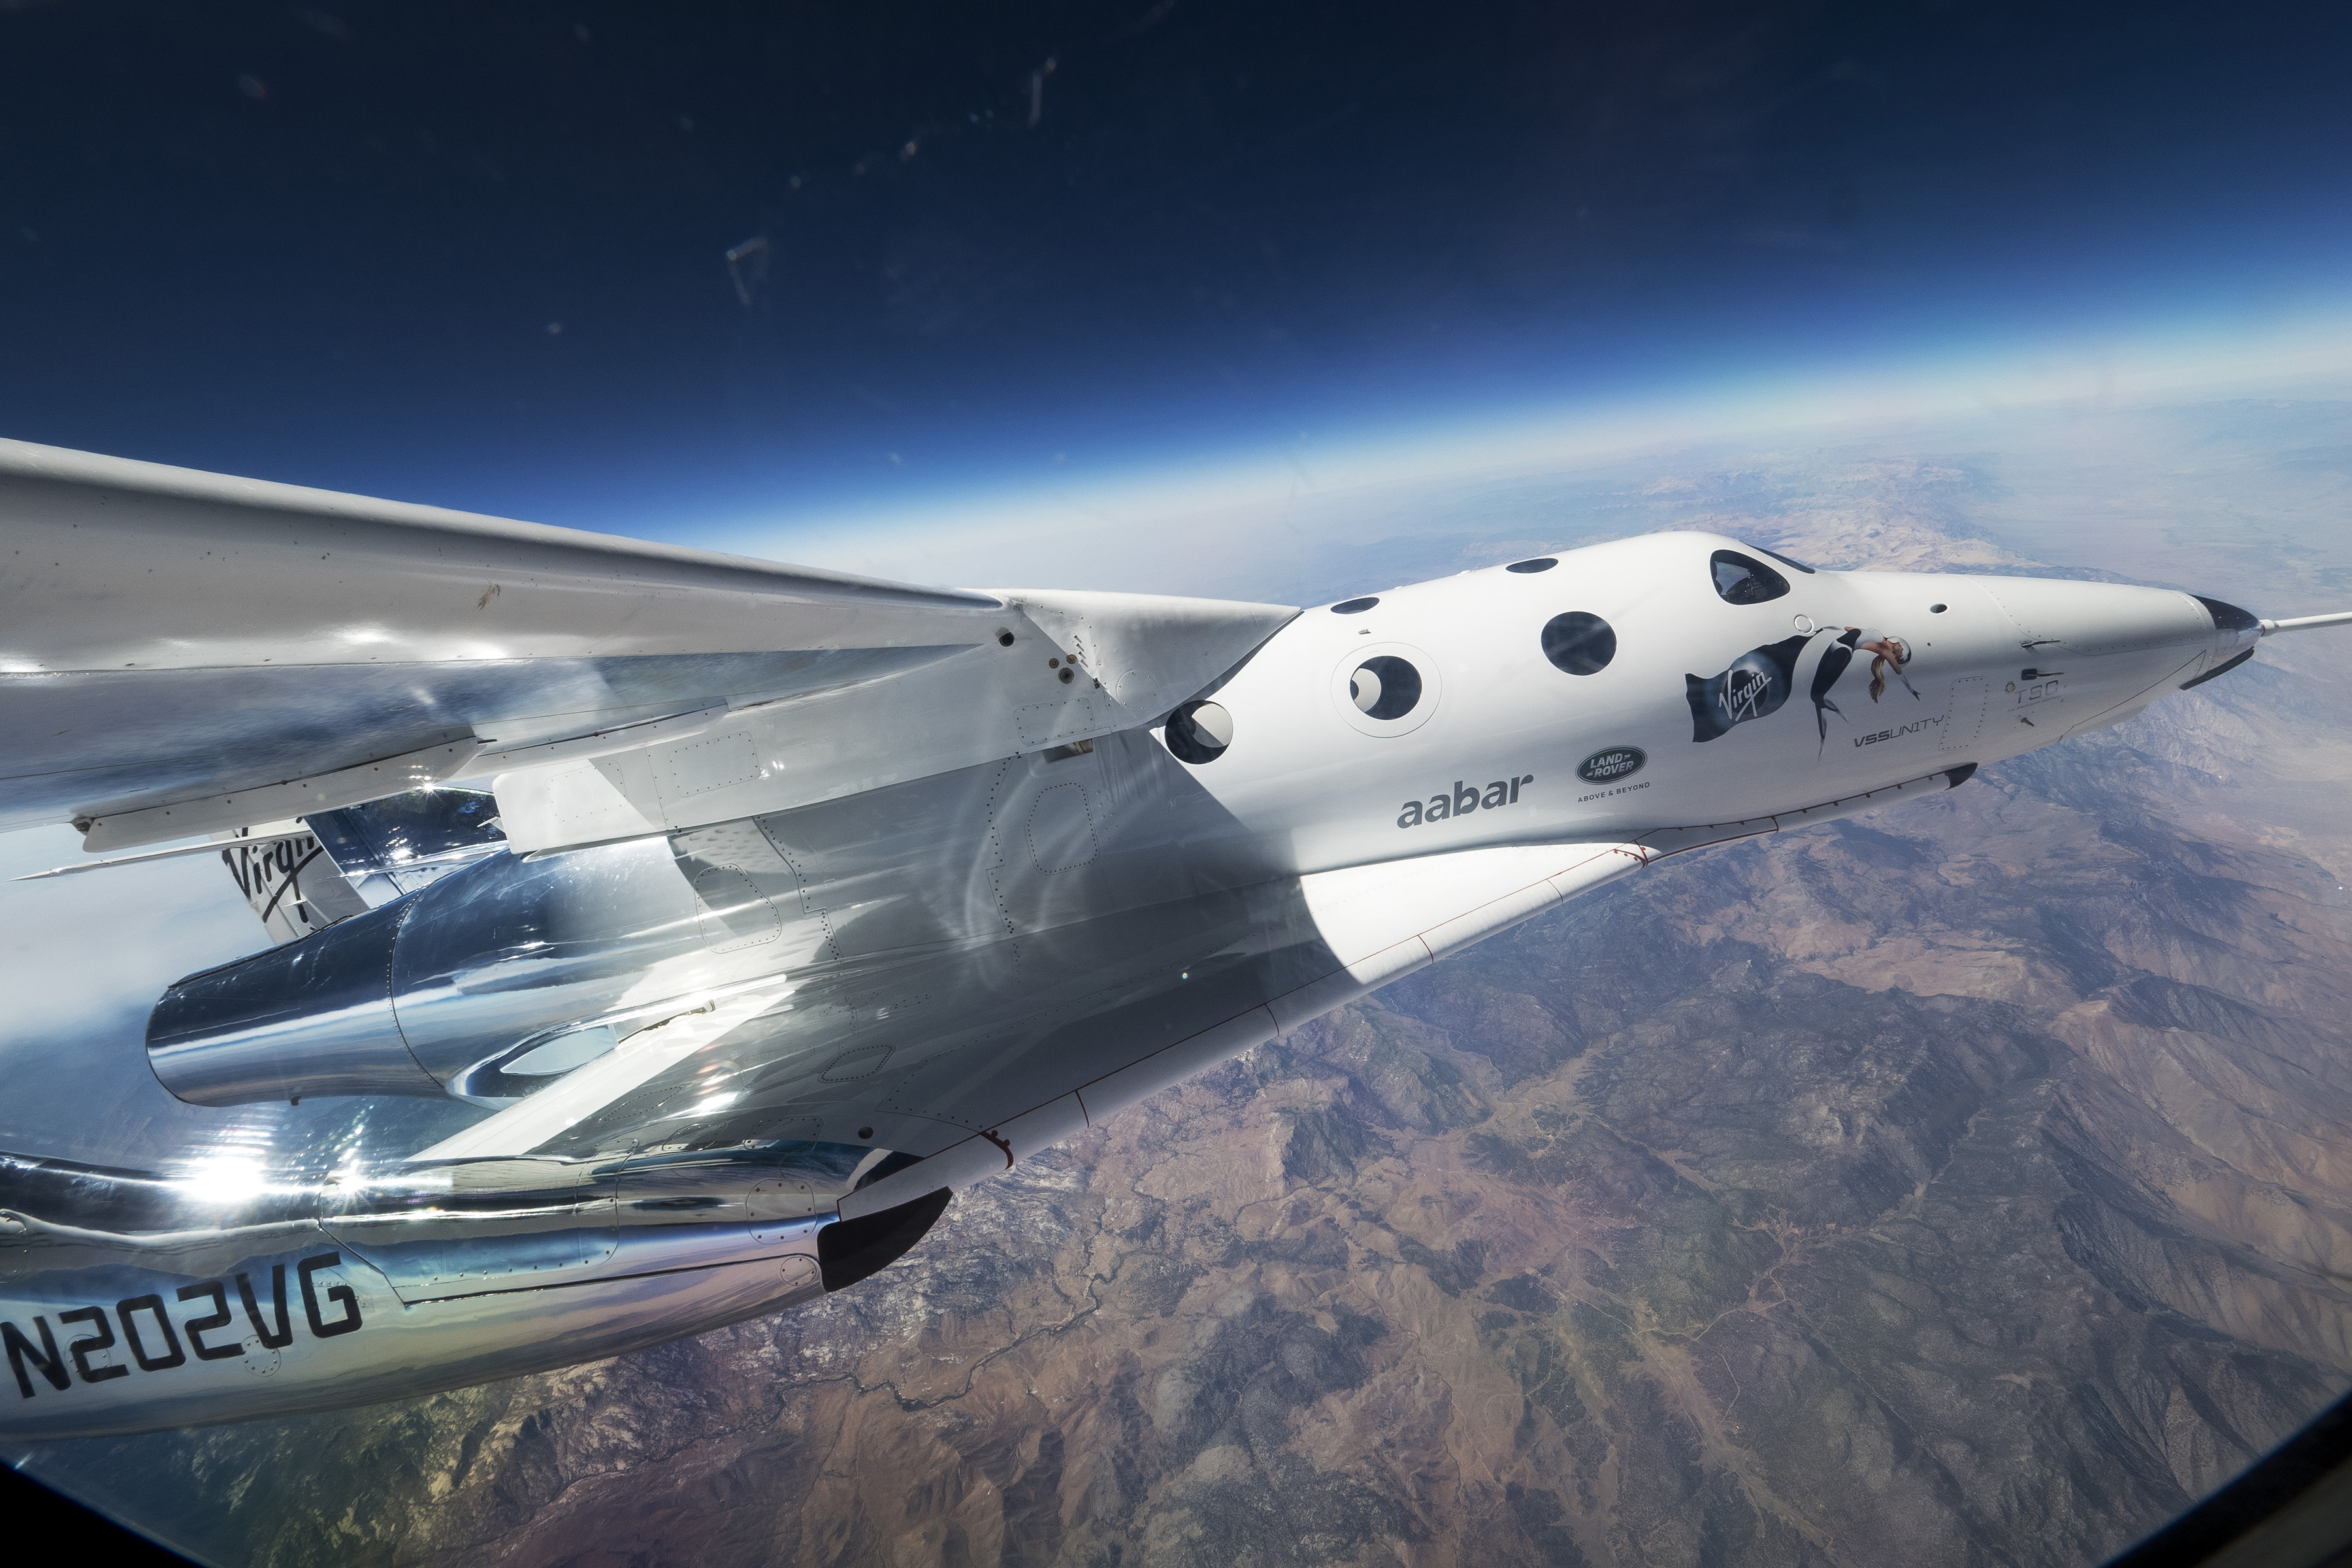 Virgin Galactic Unity Virgin Galactic's VSS Unity Just Completed Its